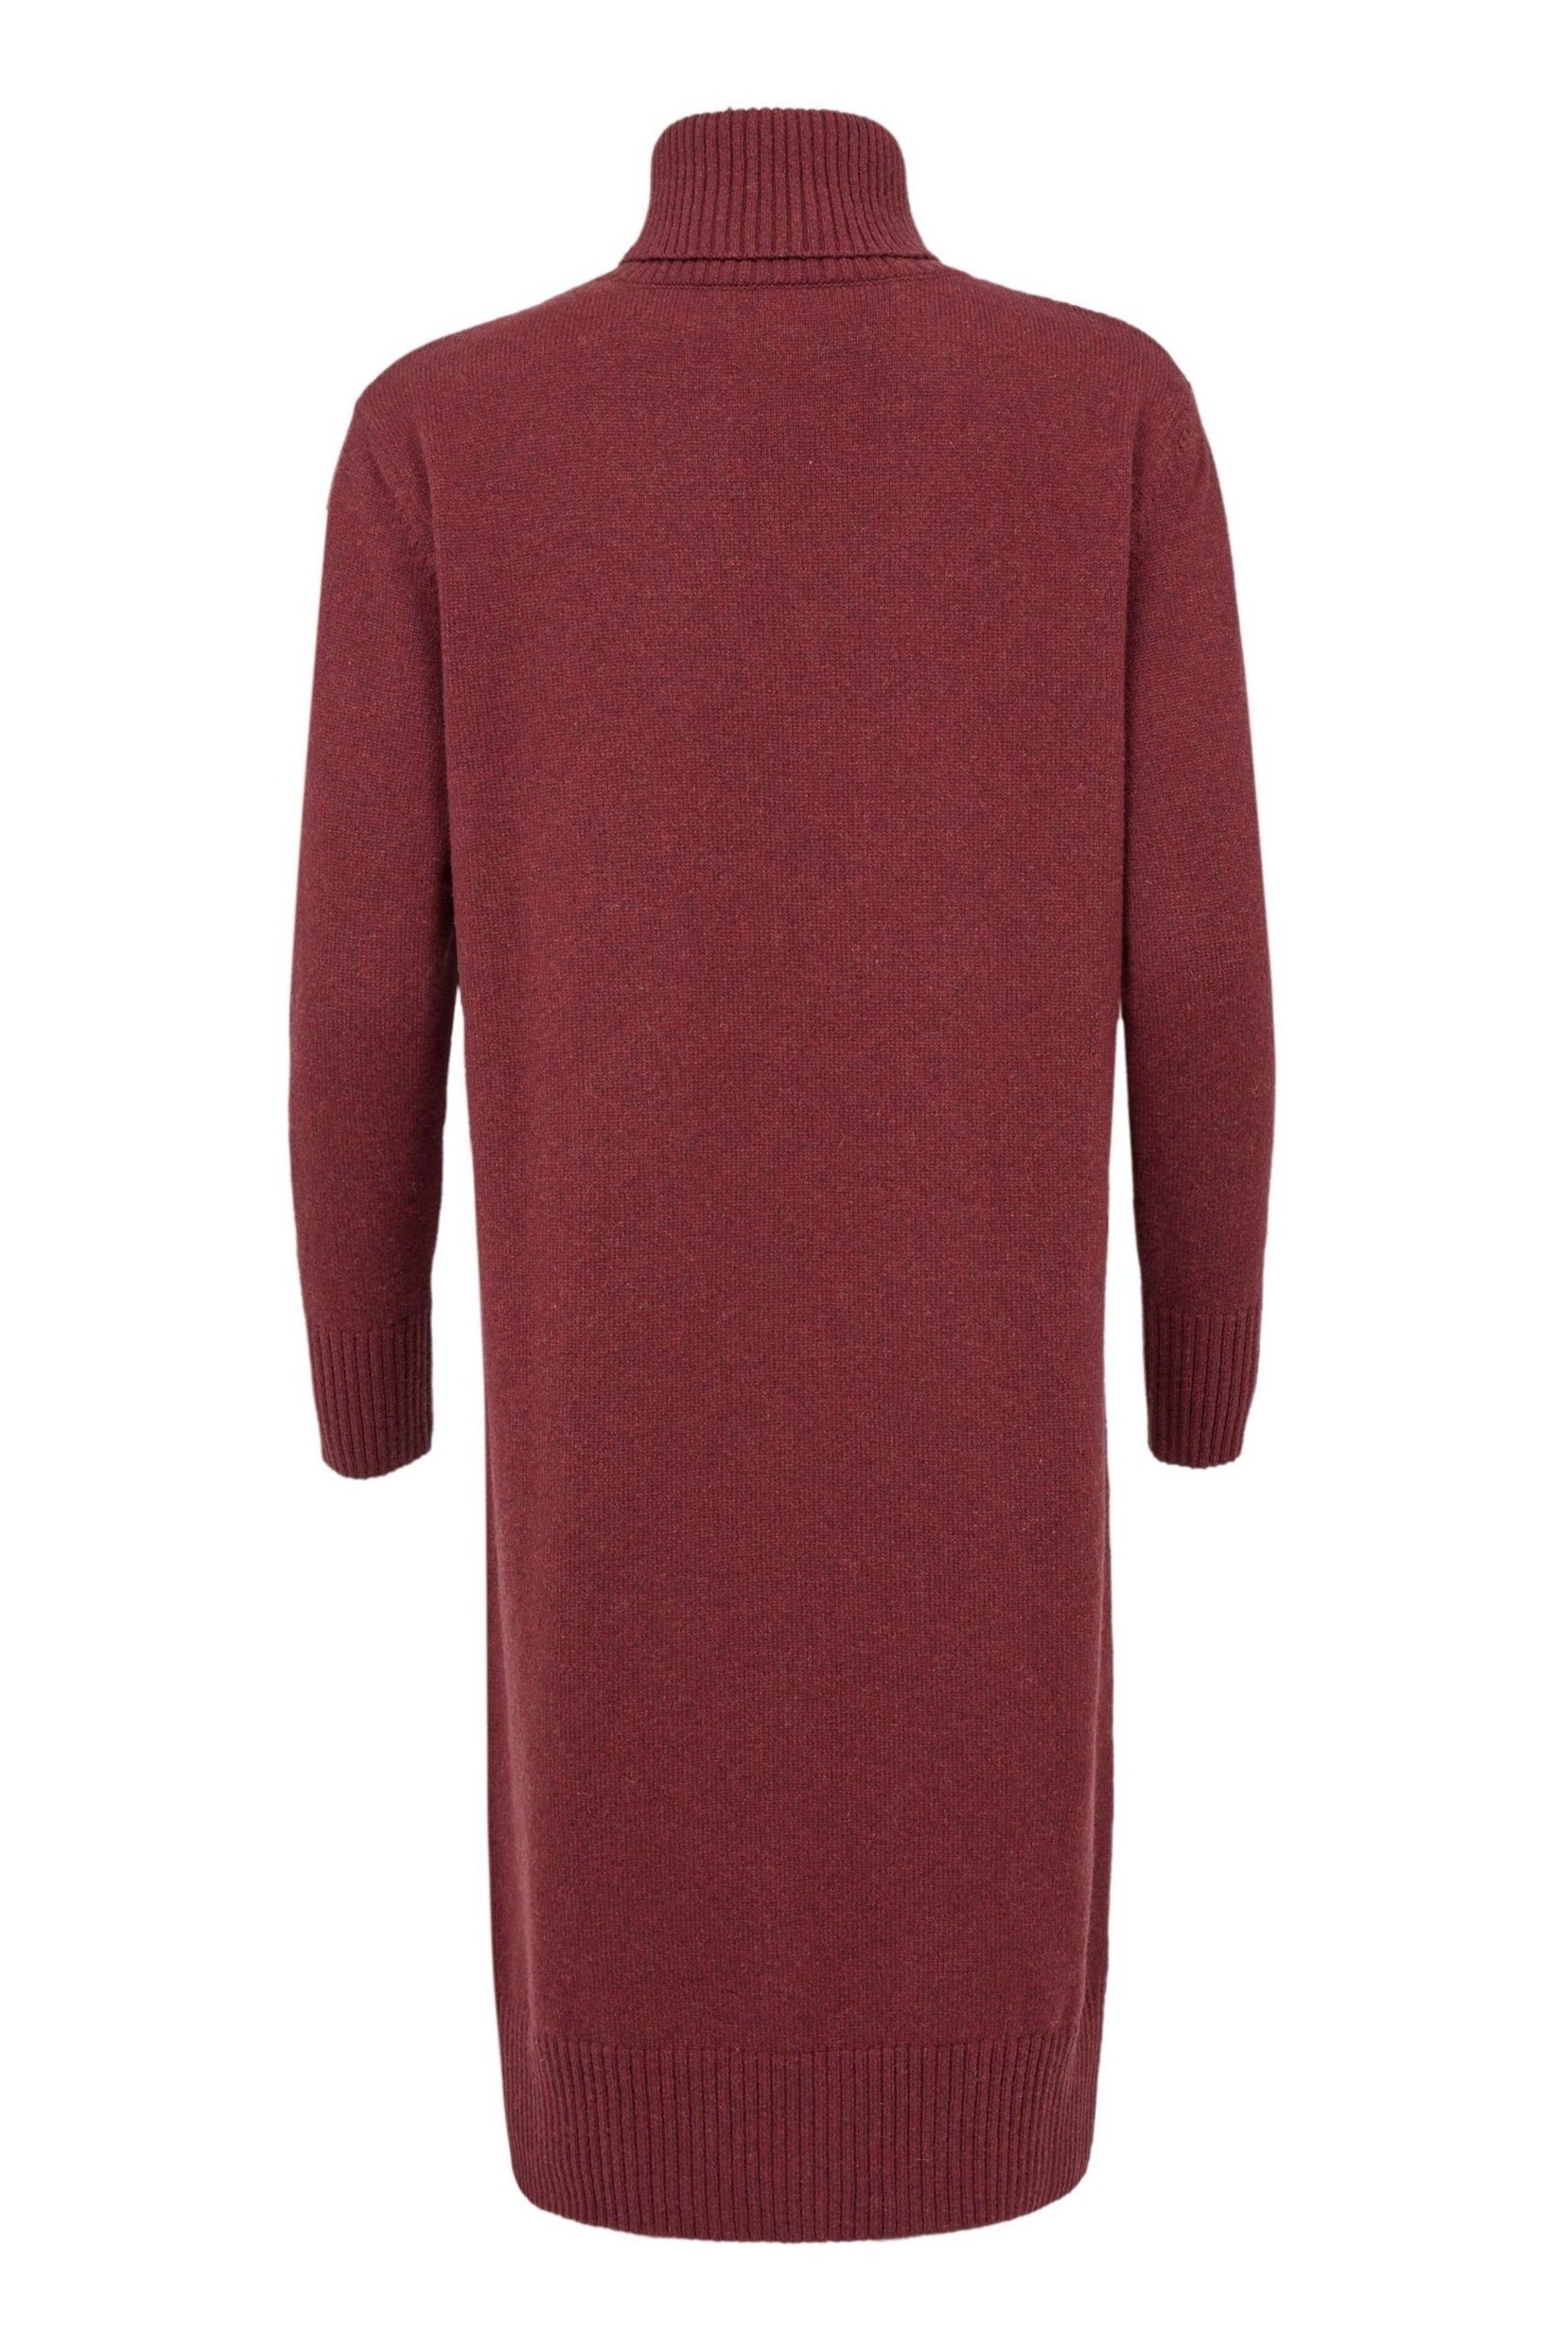 Celtic & Co. Lambswool Roll Neck Brown Dress - Image 6 of 10